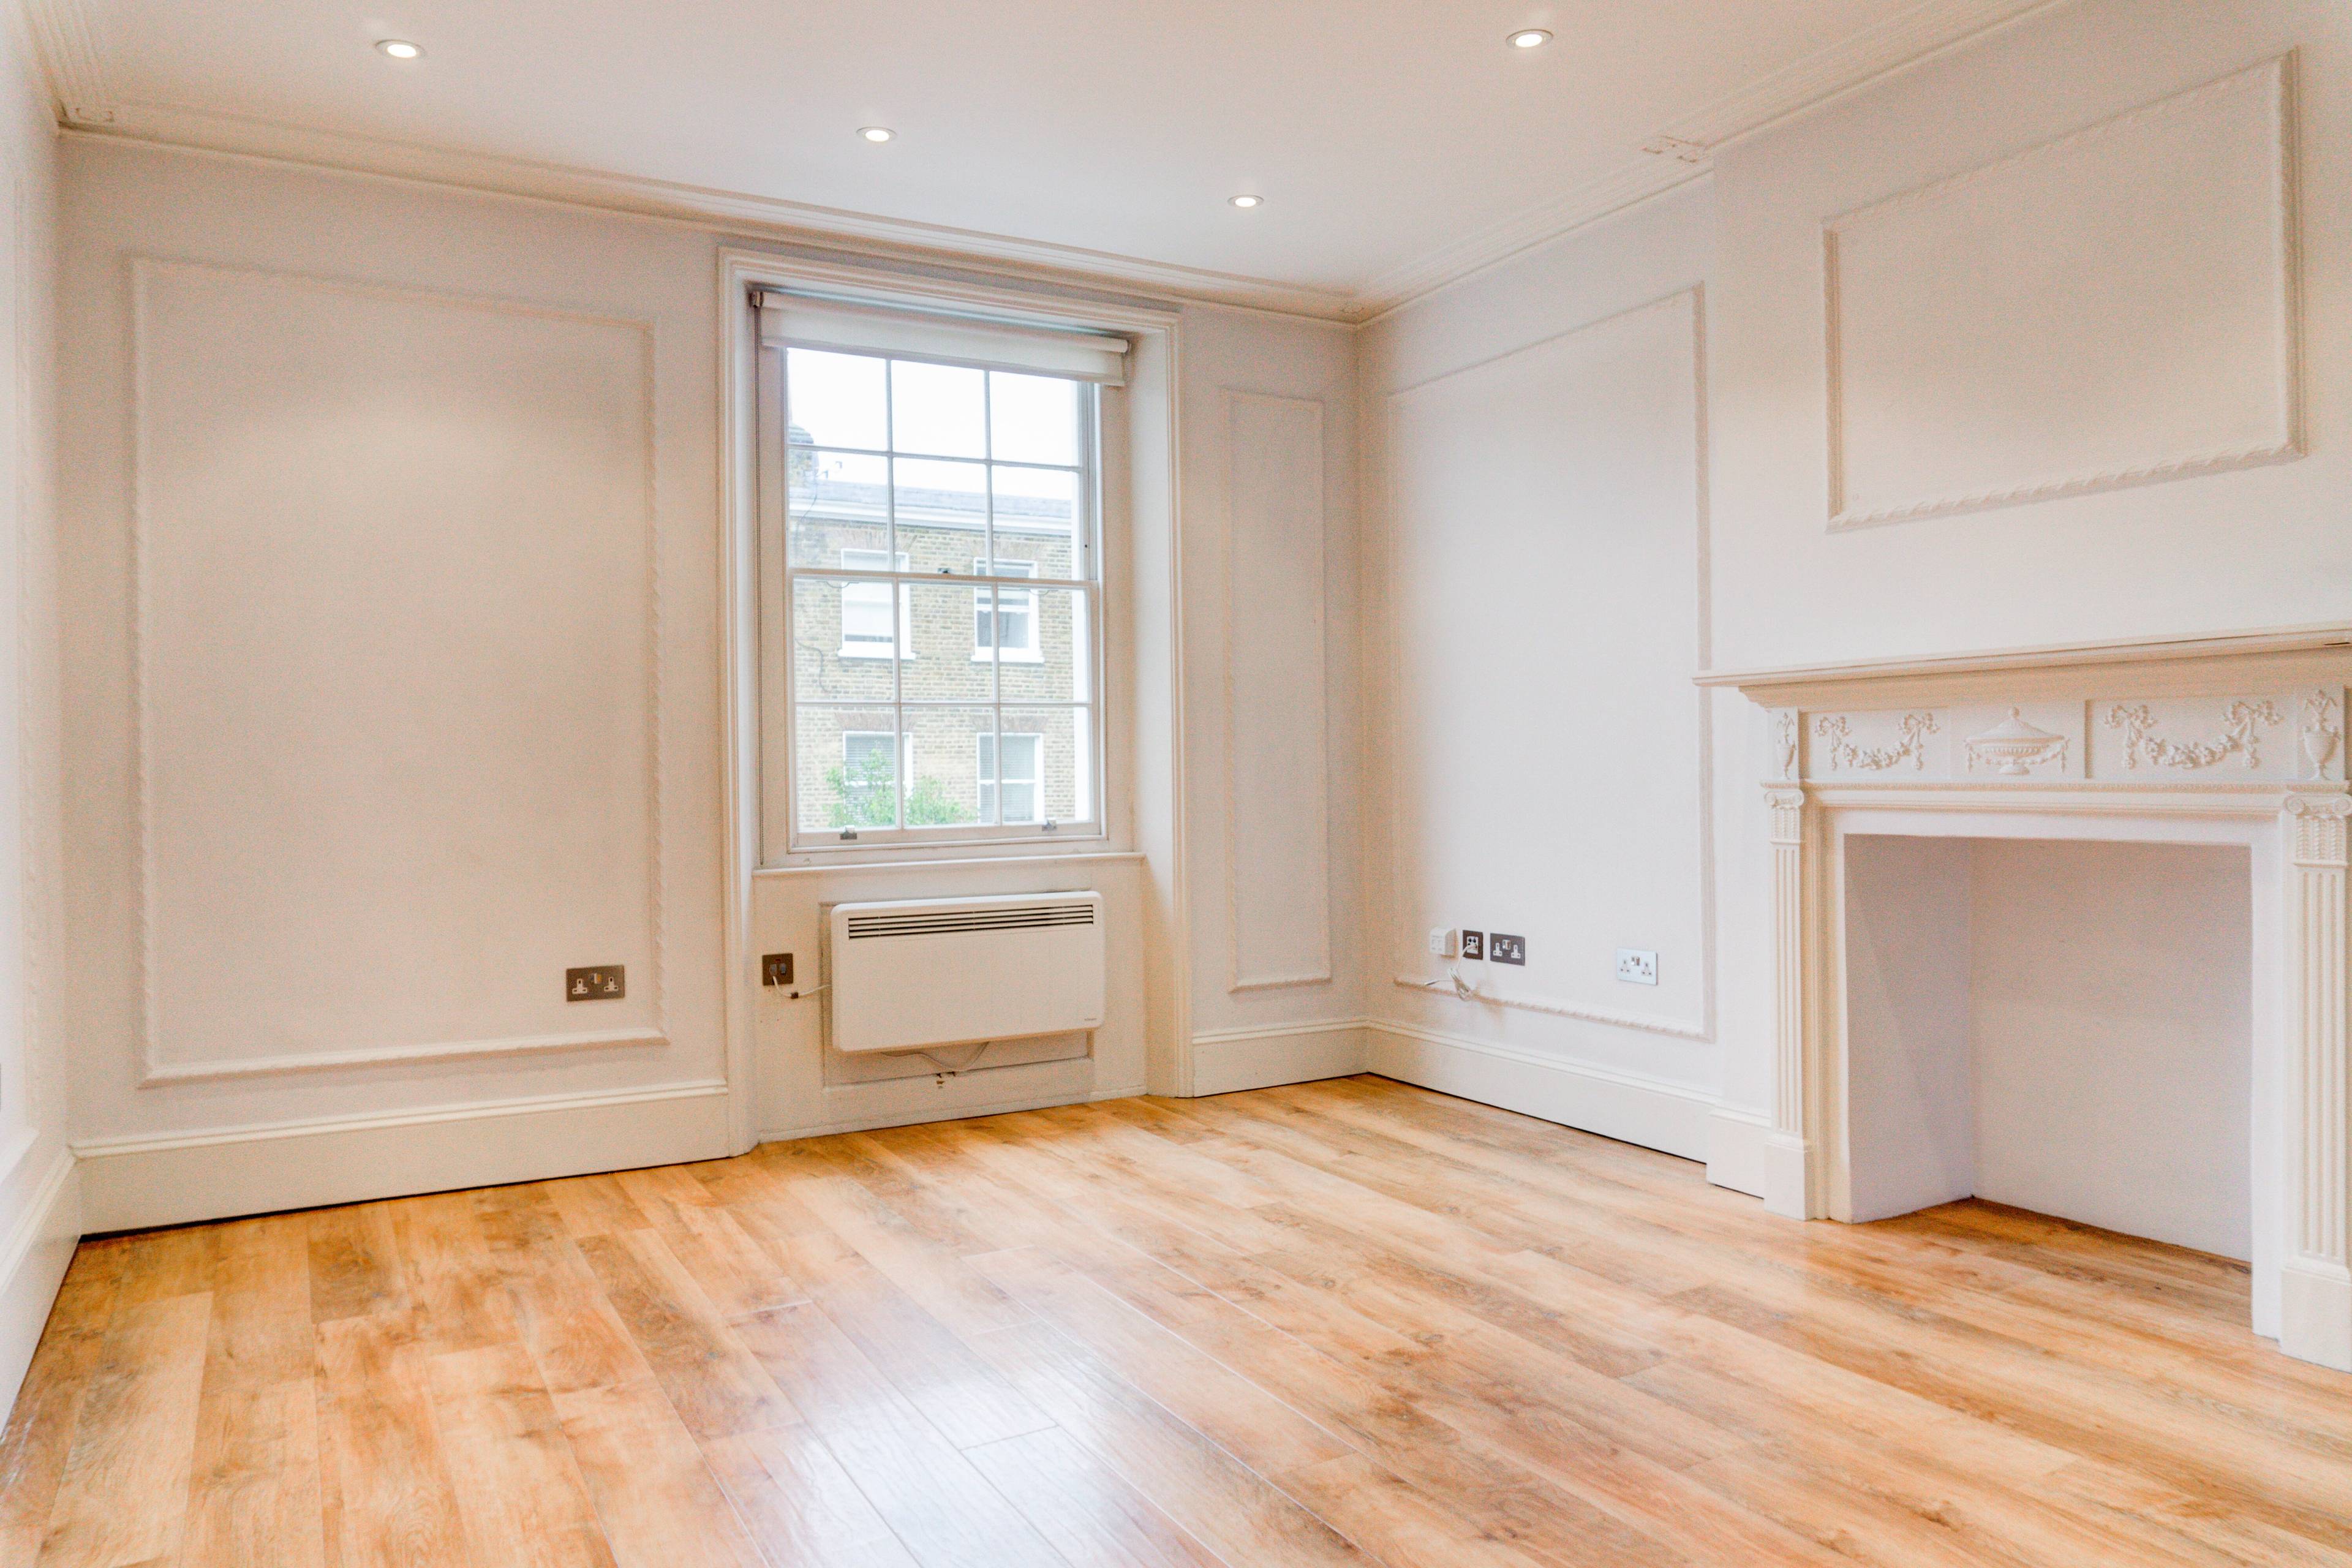 A bright and modern one bedroom apartment in the heart of Marylebone.